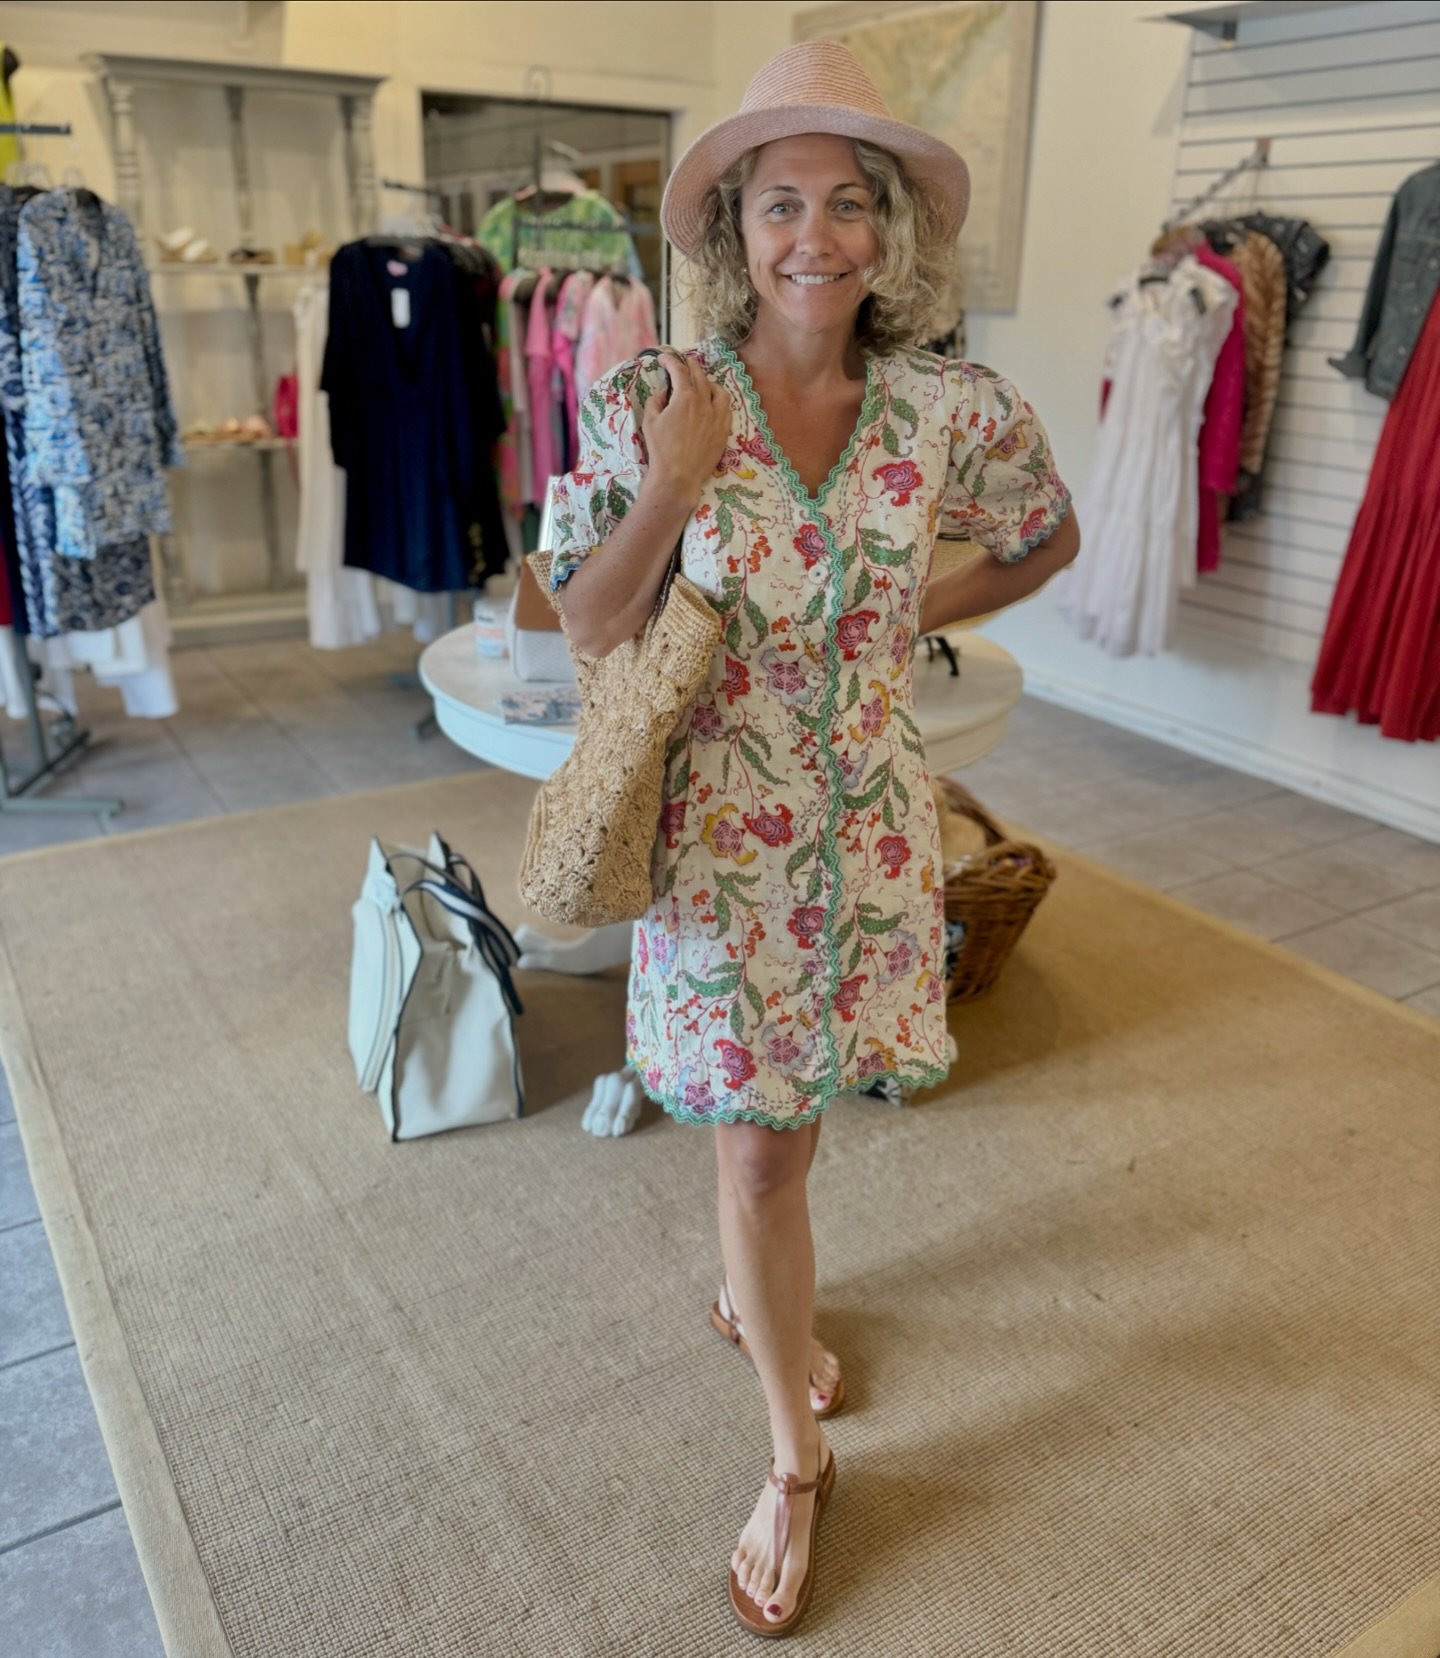 Getting beach ready as we&rsquo;re about to kick off the summer with Memorial Day weekend ☀️ 🌊 🏖️ come shop red, white, blue, &amp; all your beach day looks! 

#consigningwomen #consignment #cw #consigning #shopping #shop #looks #springtosummer #su